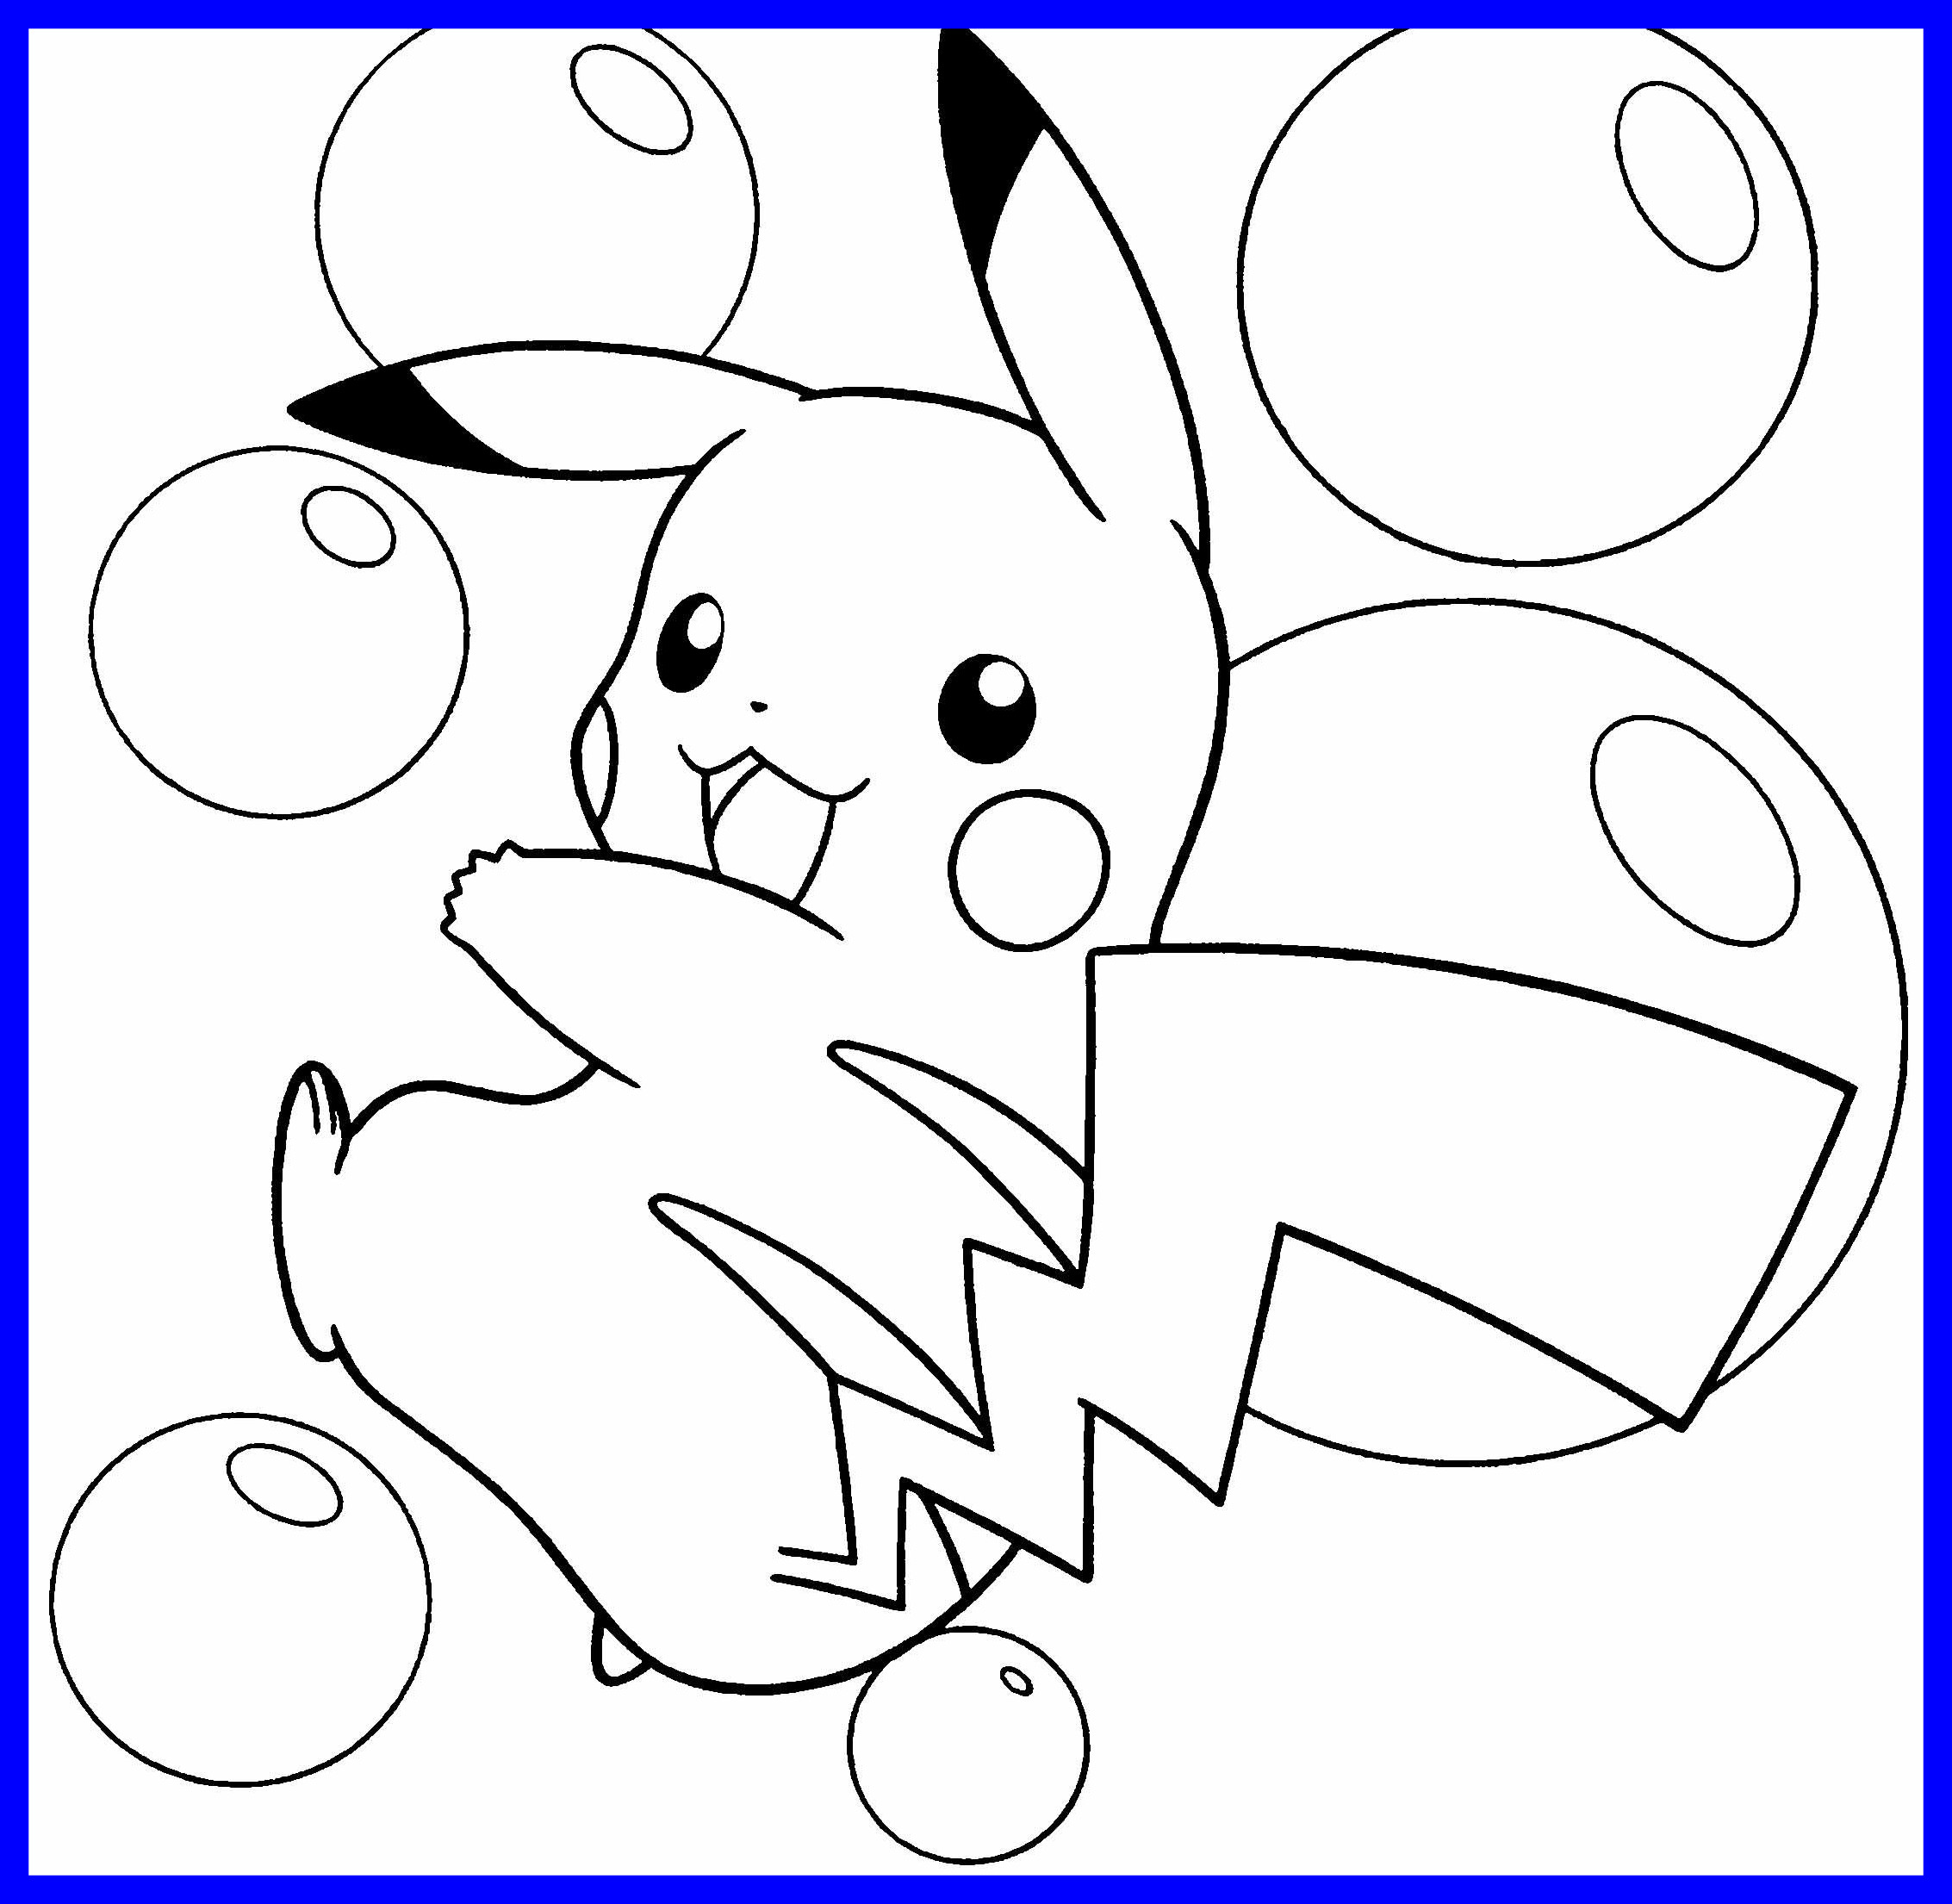 Weedle Coloring Pages at GetColorings.com | Free printable colorings